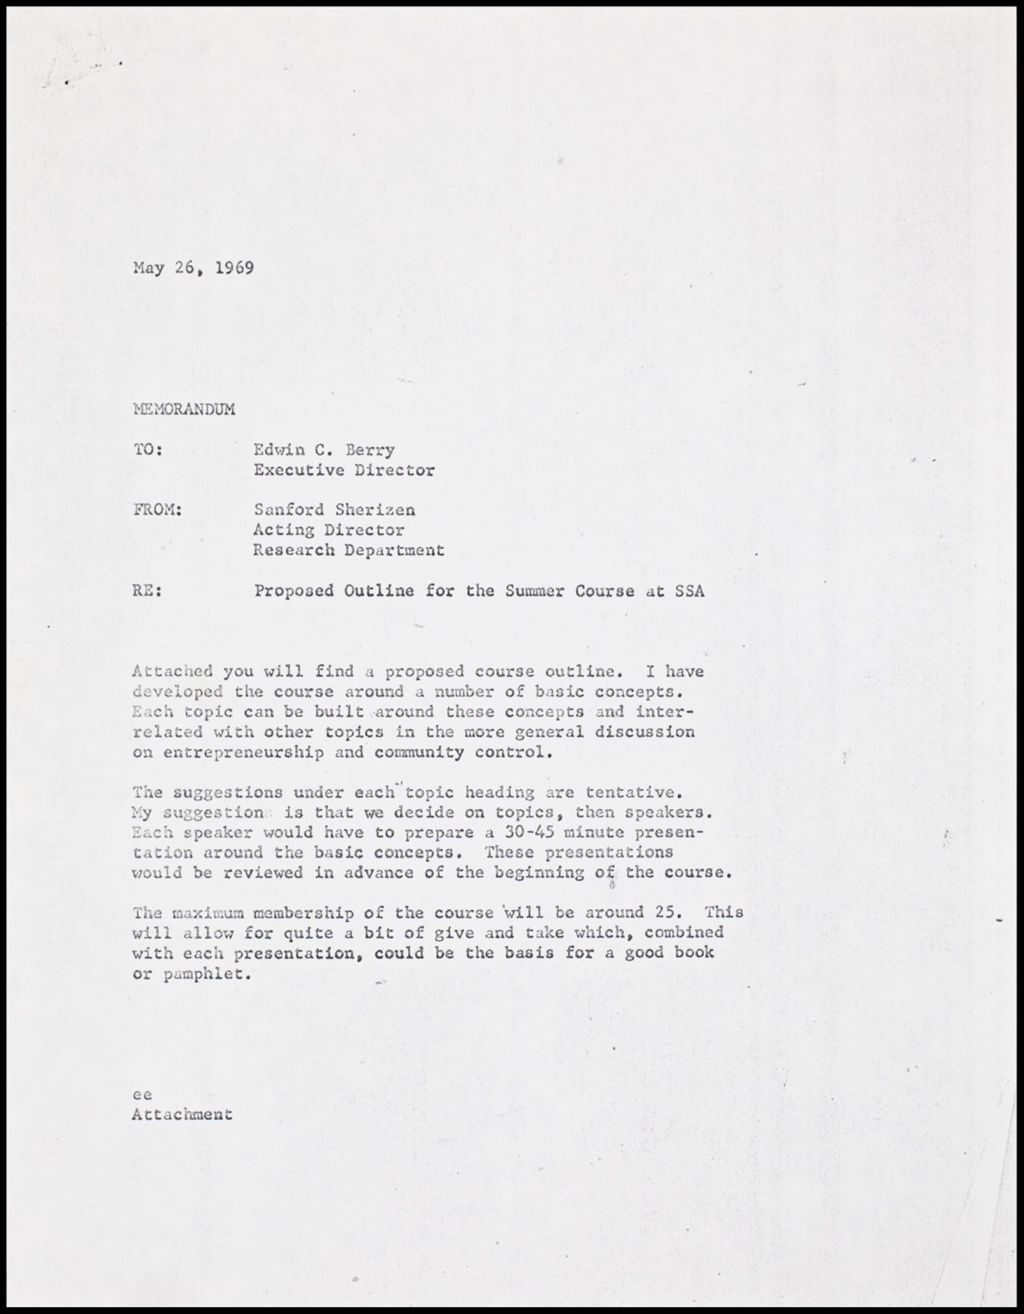 Miniature of Course Outline - Effecting Change in Racism in American Society, 1969 (Folder II-2253)